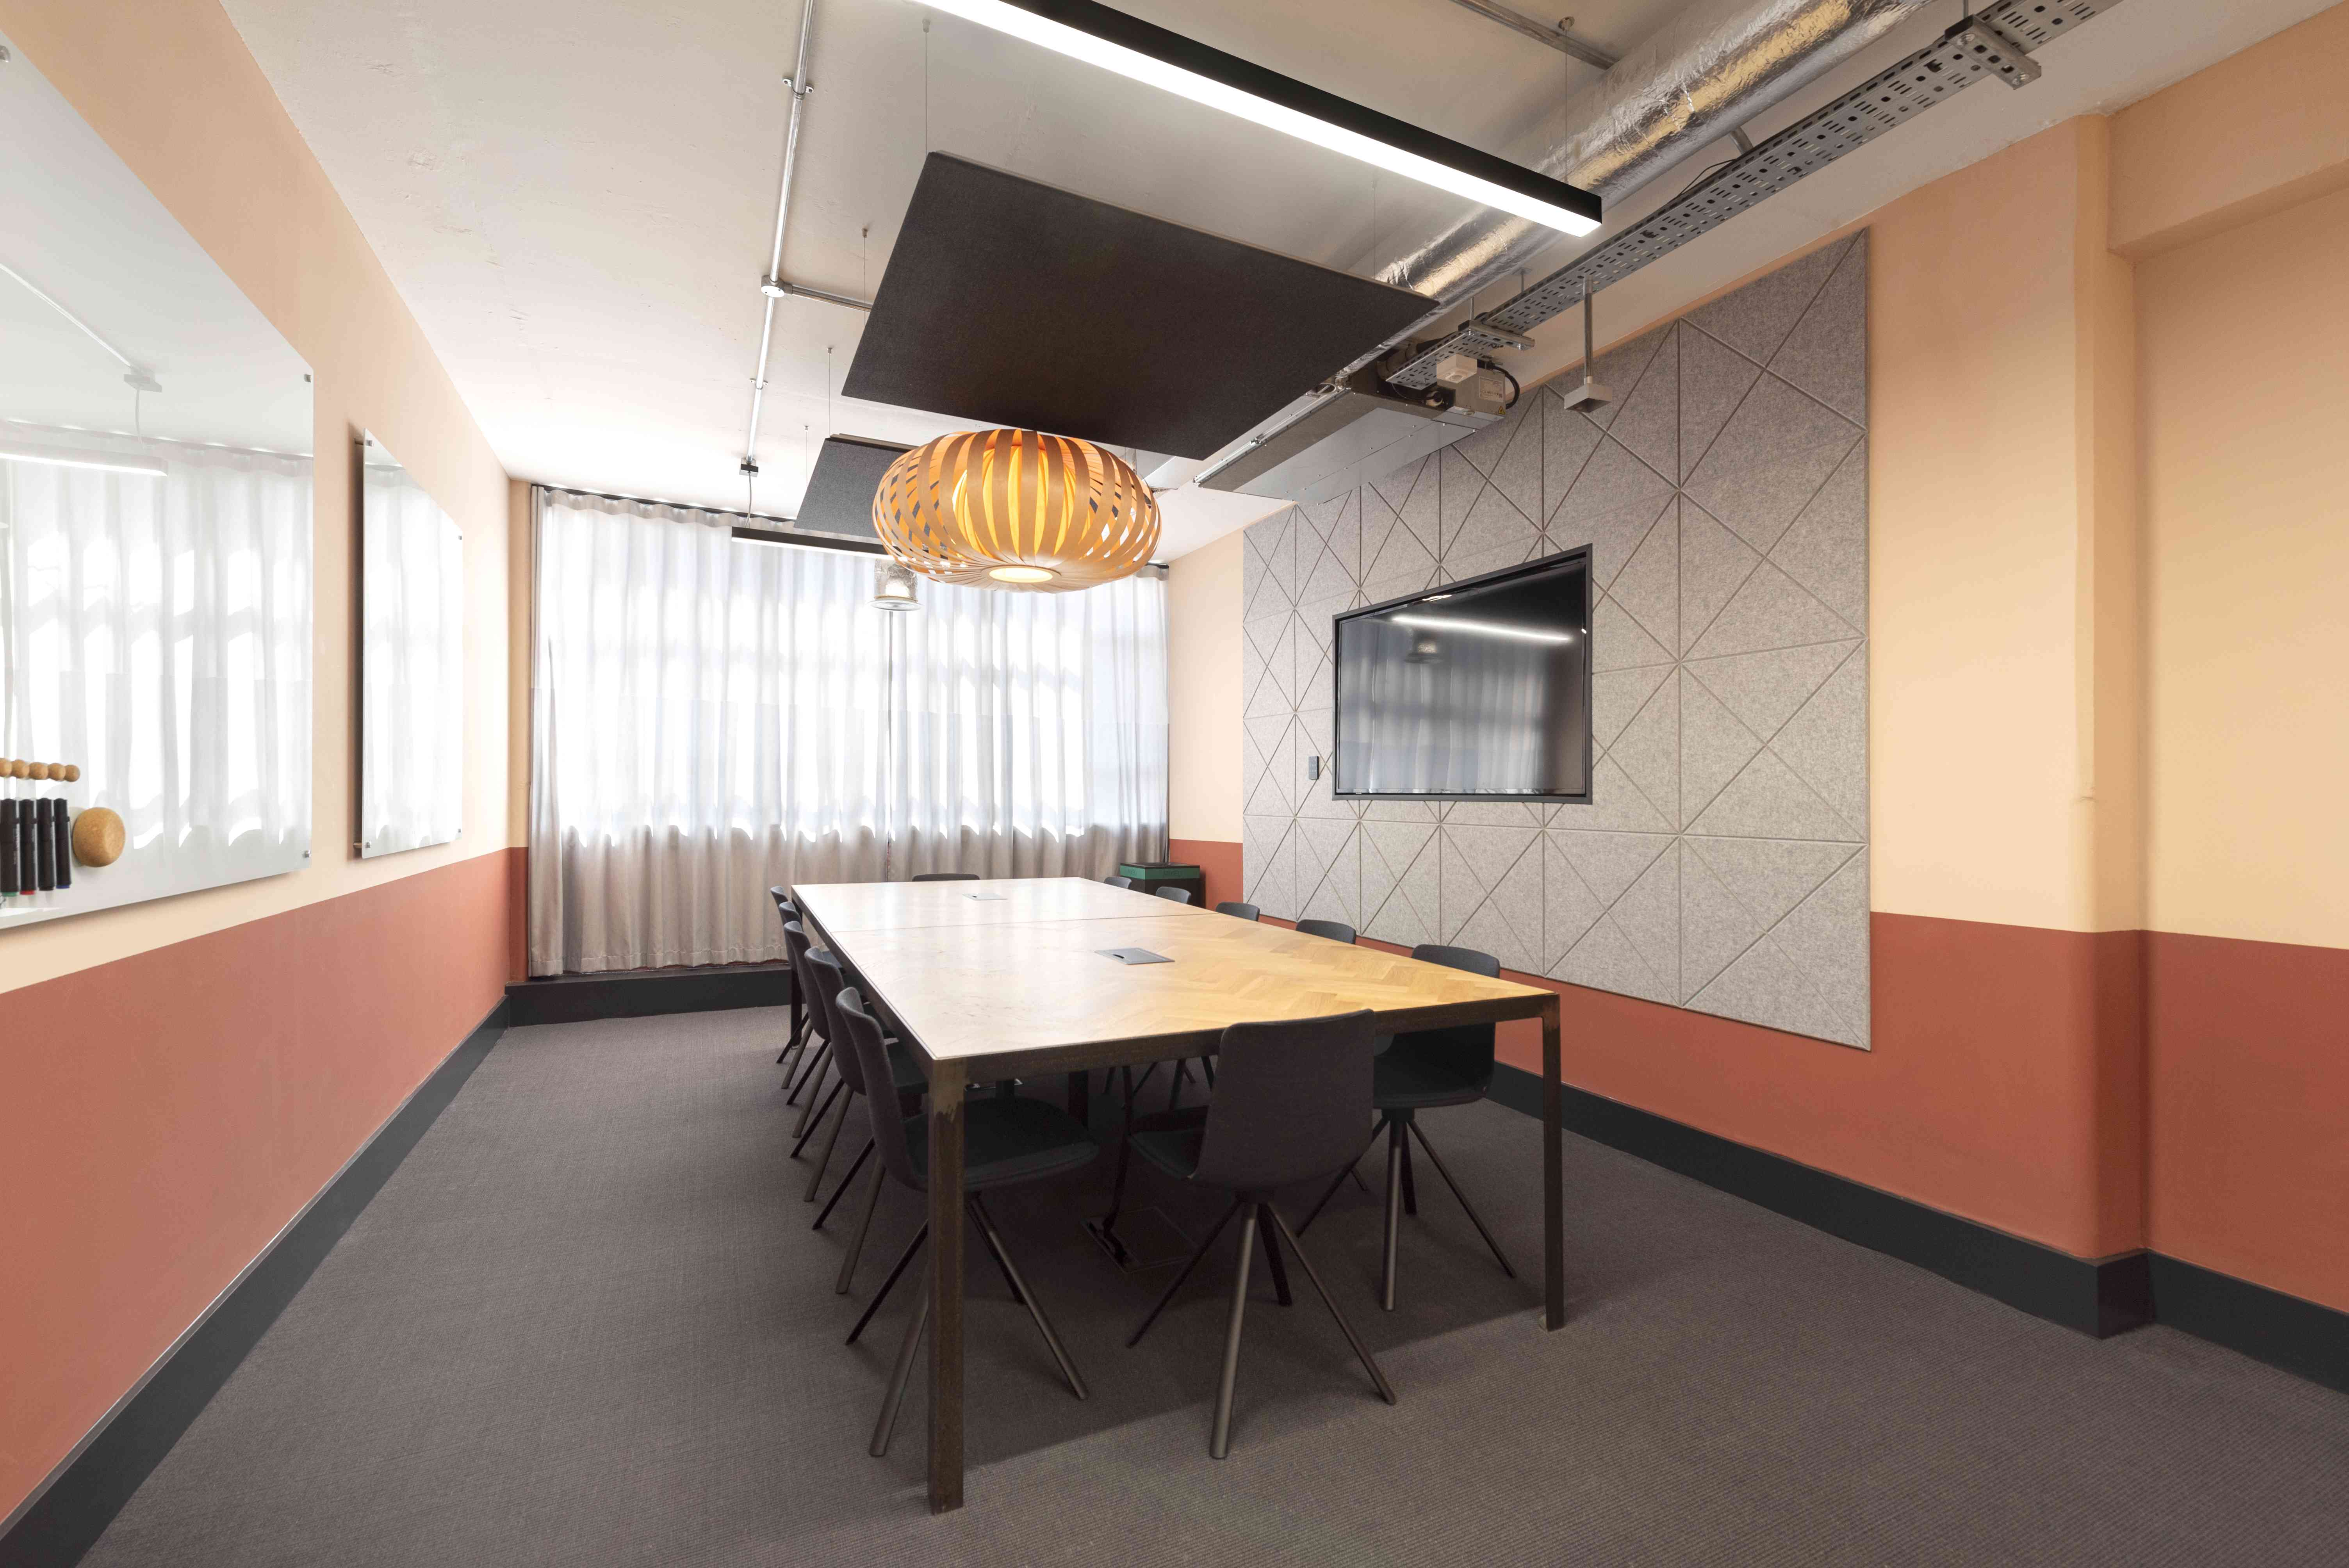 The Leather Market Meeting Room, meeting room hire London Bridge Workspace® | The Leather Market London 020 3504 7784